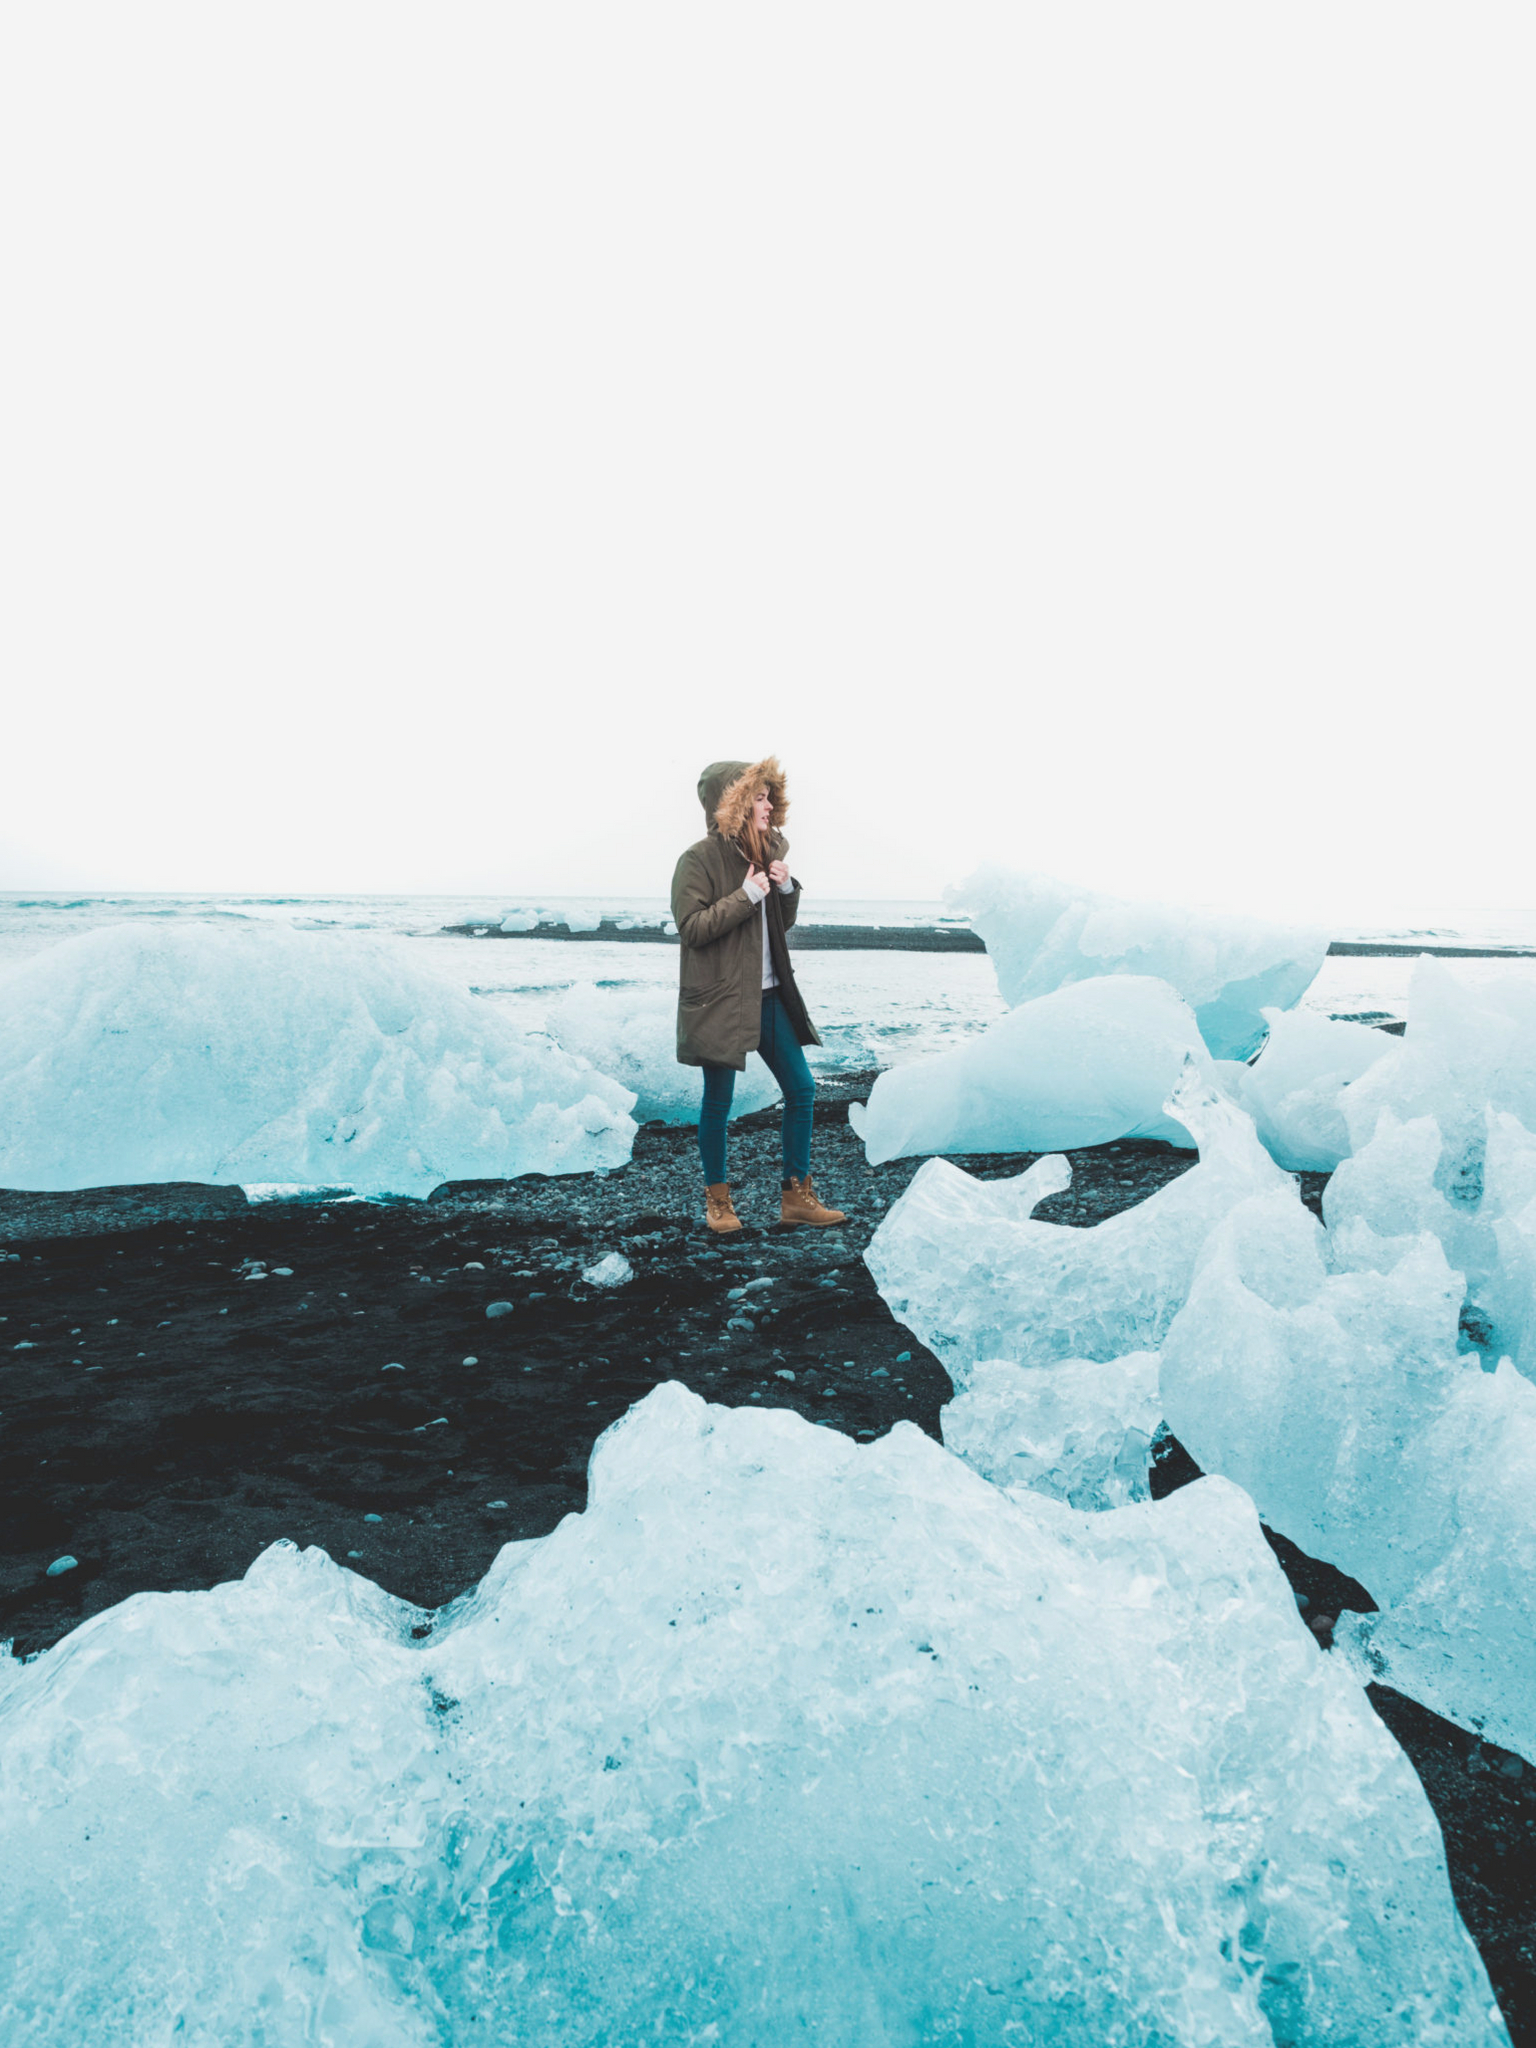 How to make the most of Four Days in Iceland | WORLD OF WANDERLUST